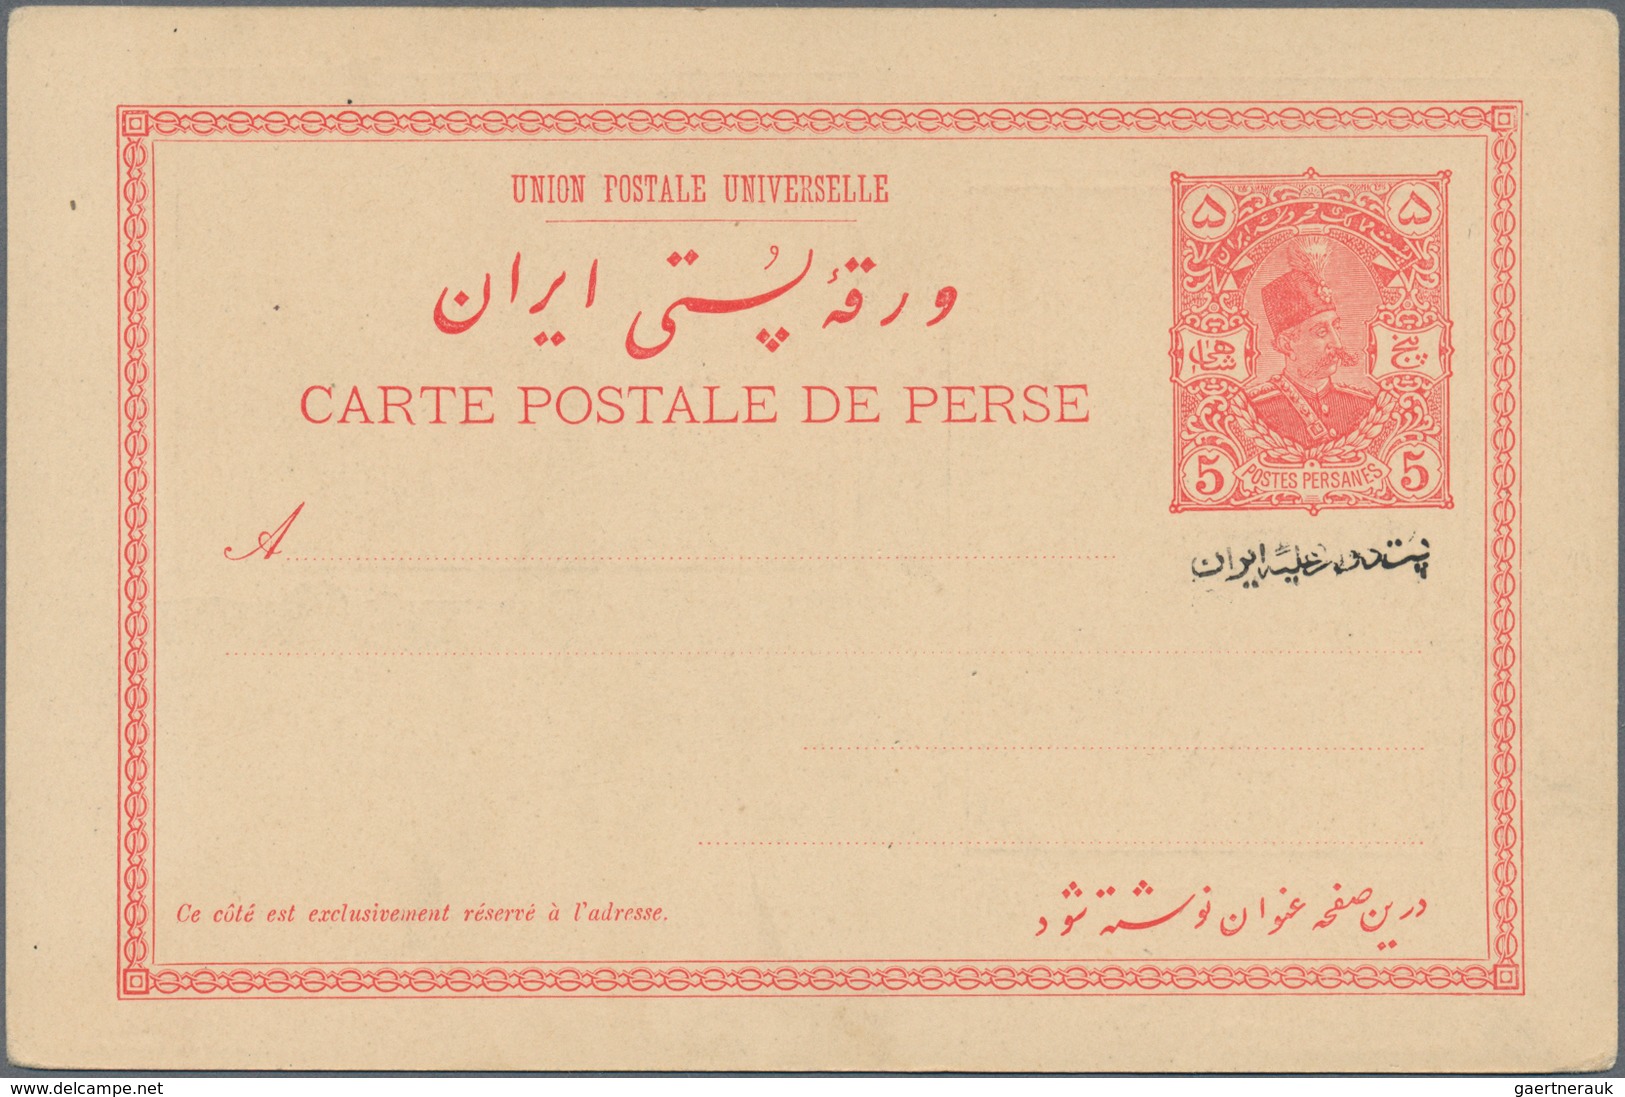 Iran: 1904, Two Pictorial Stat. Postcards 5ch. 'Shah Muzzafar-ad-Din' With Persian Ptg. Below Stamp - Iran